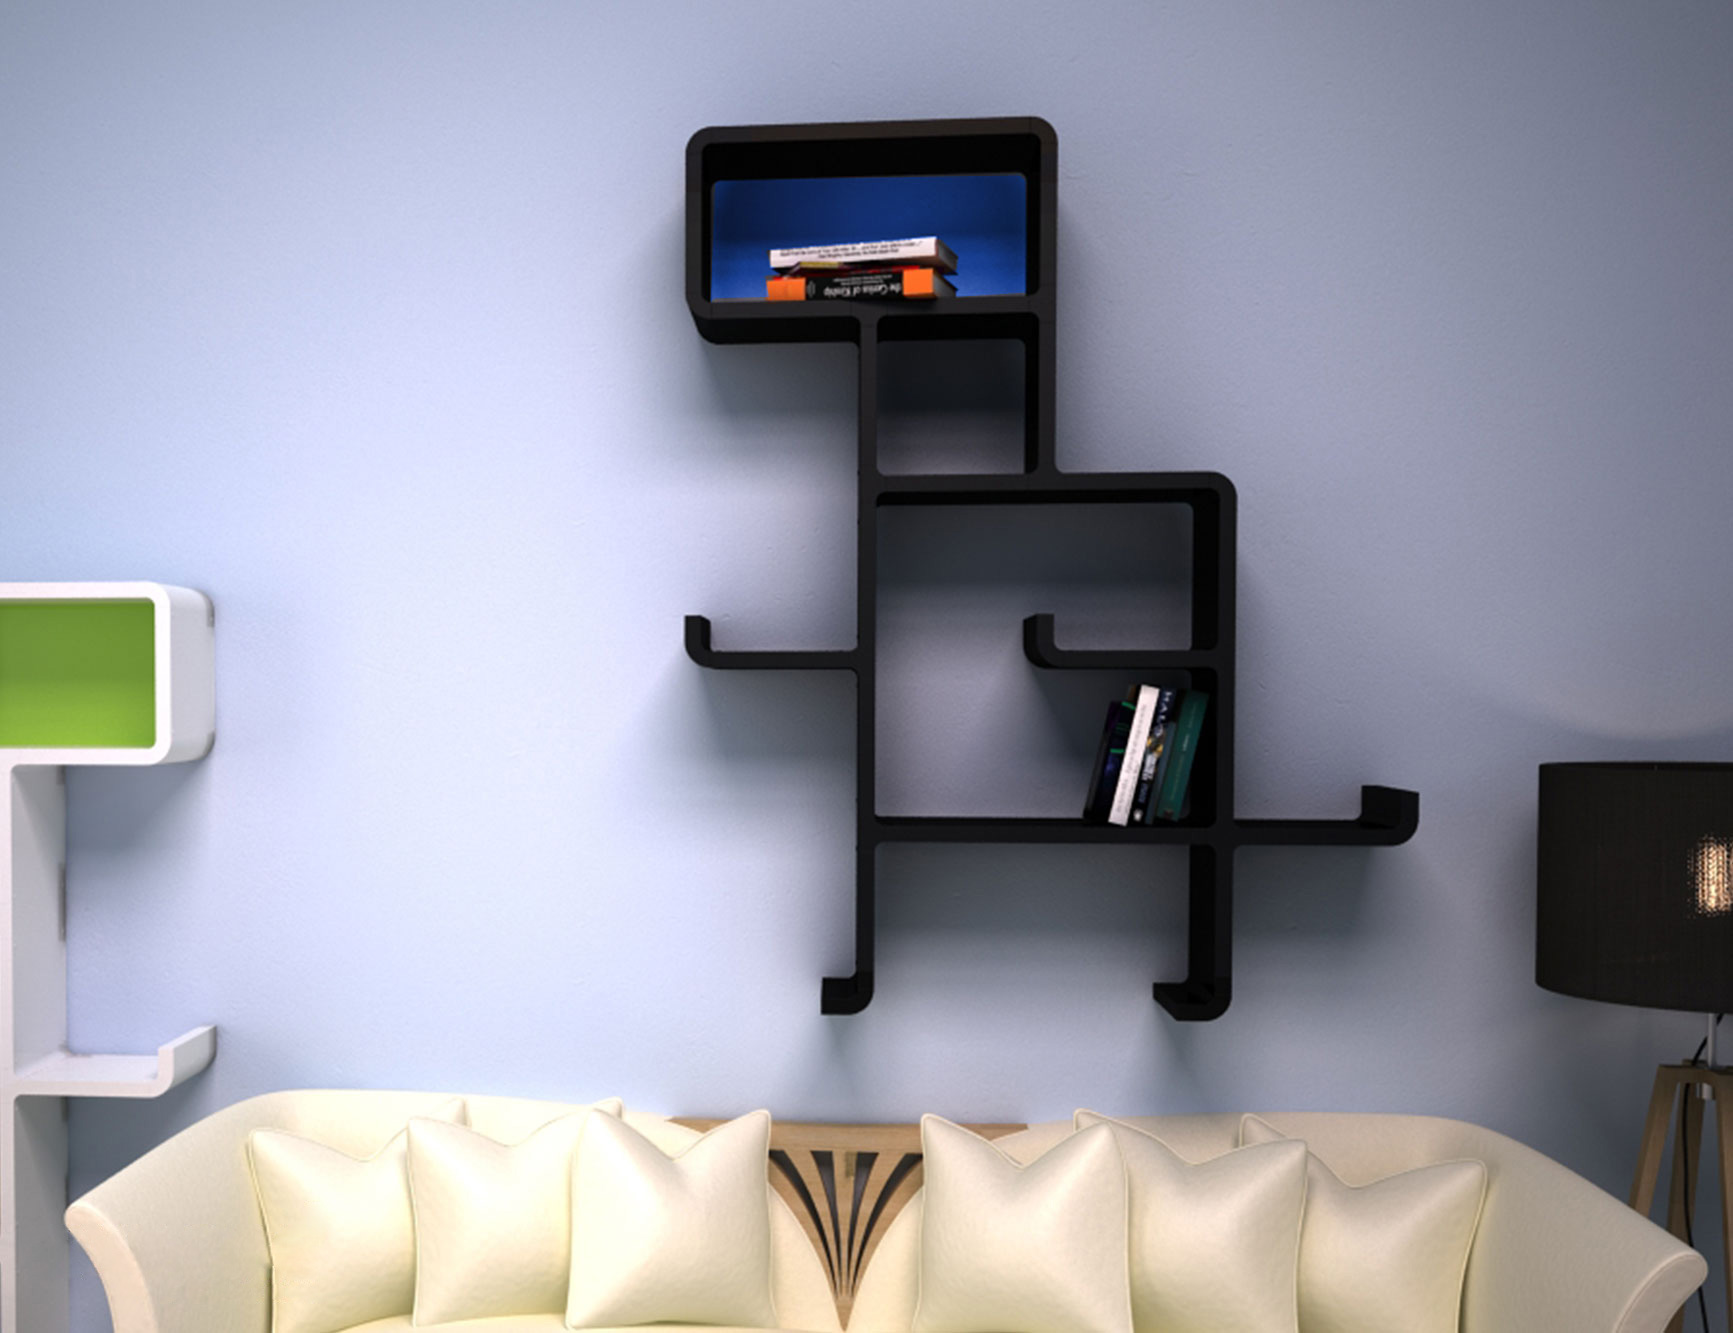 https://expandfurniture.com/wp-content/uploads/2015/09/Wall-Shelf-Dinosaur-in-black-and-blue-face-above-sofa-1.jpg